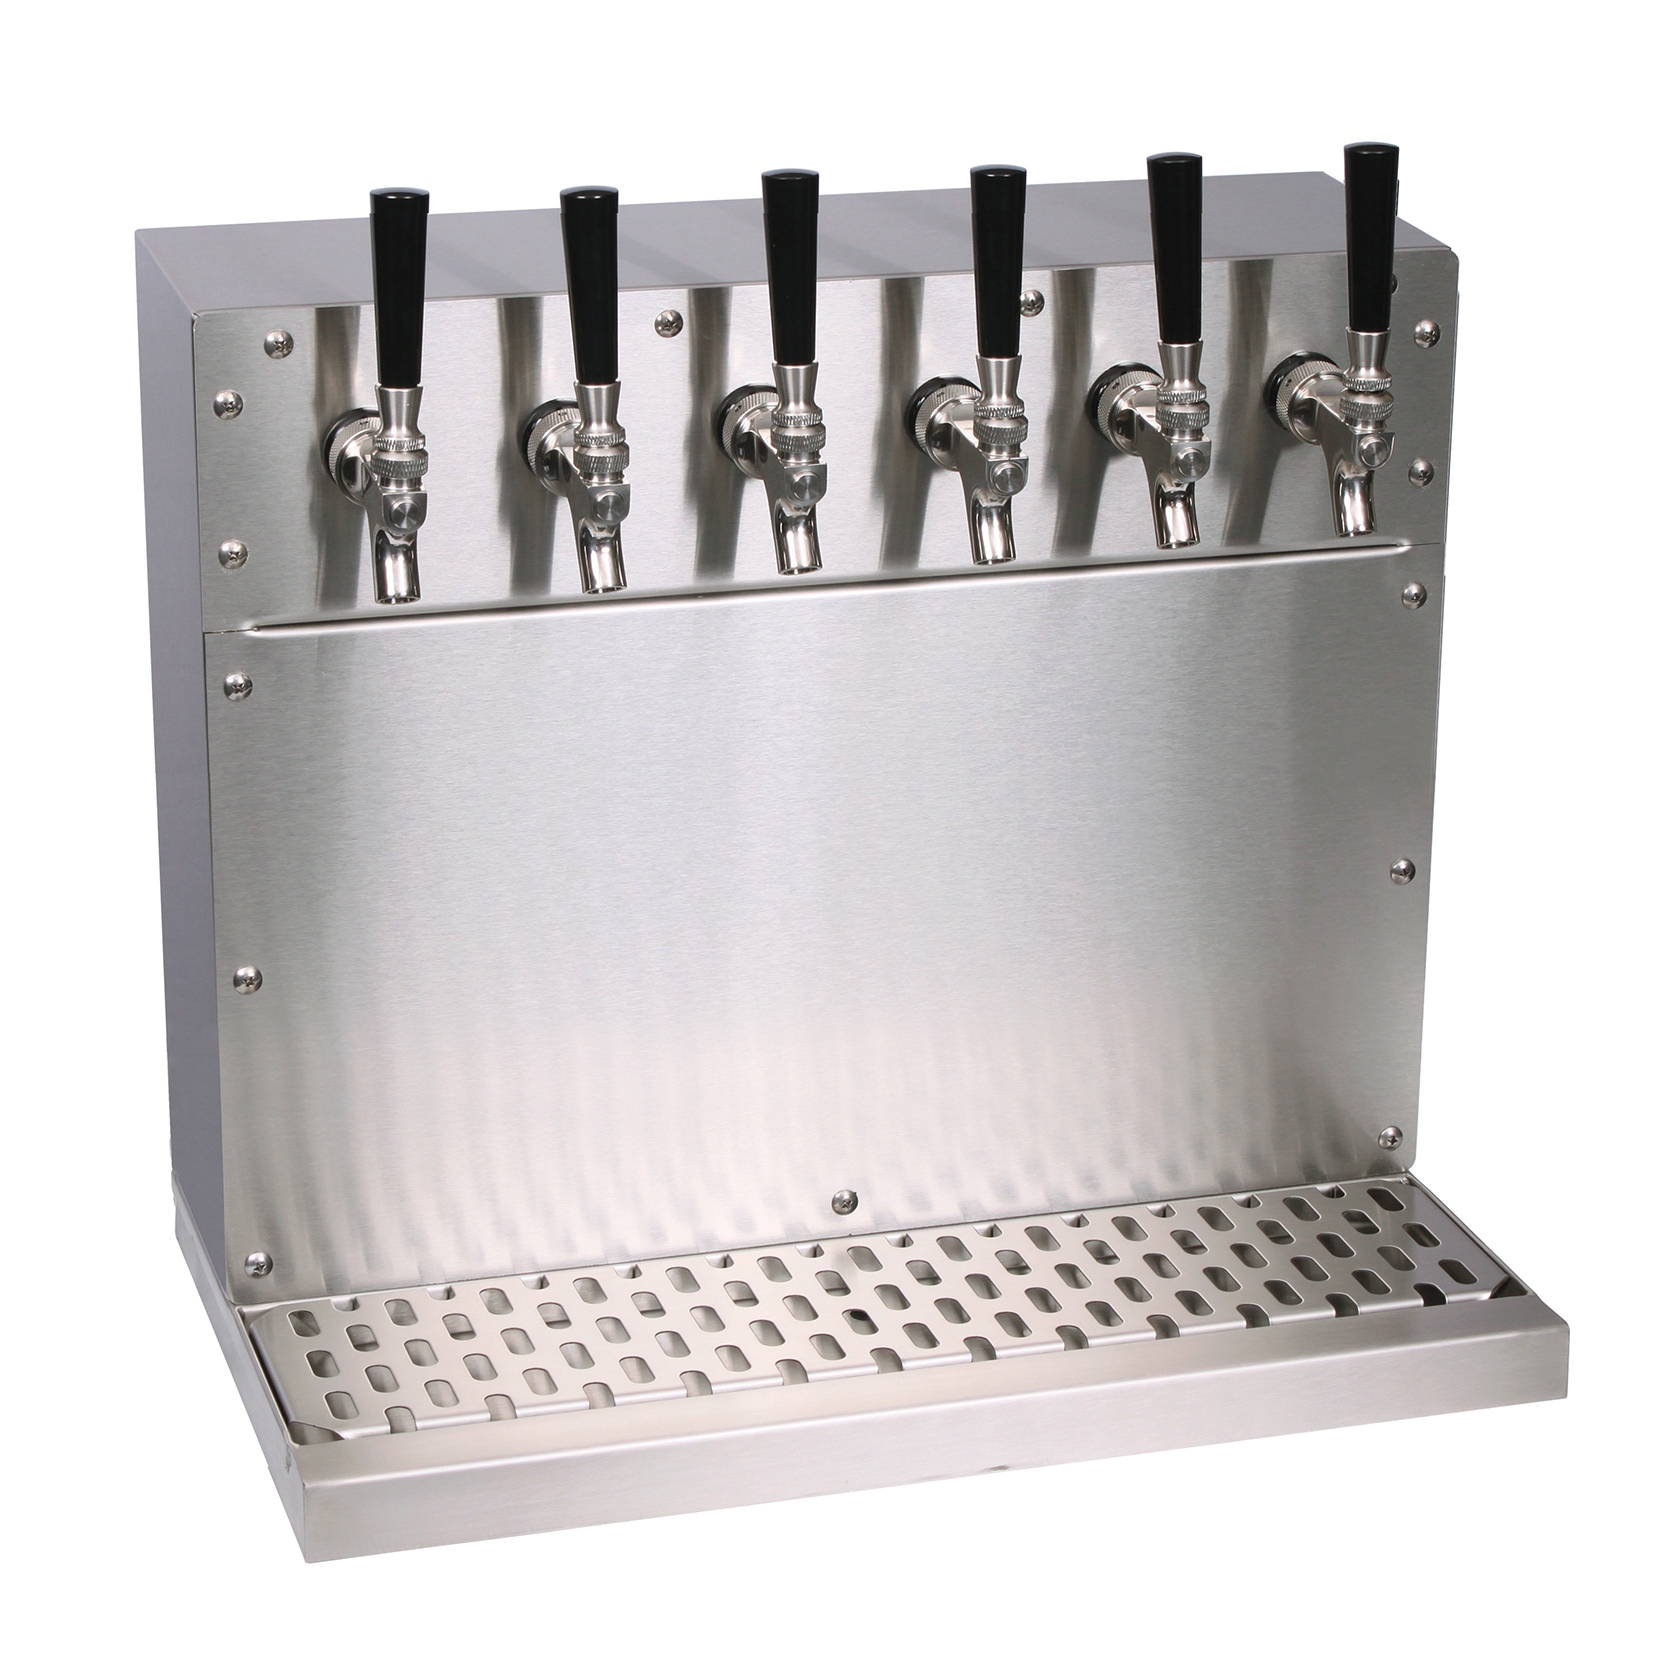 Glastender WT-5-SSR Draft Beer / Wine Dispensing Tower w/ 5 Faucets, Wall Mounting Brackets